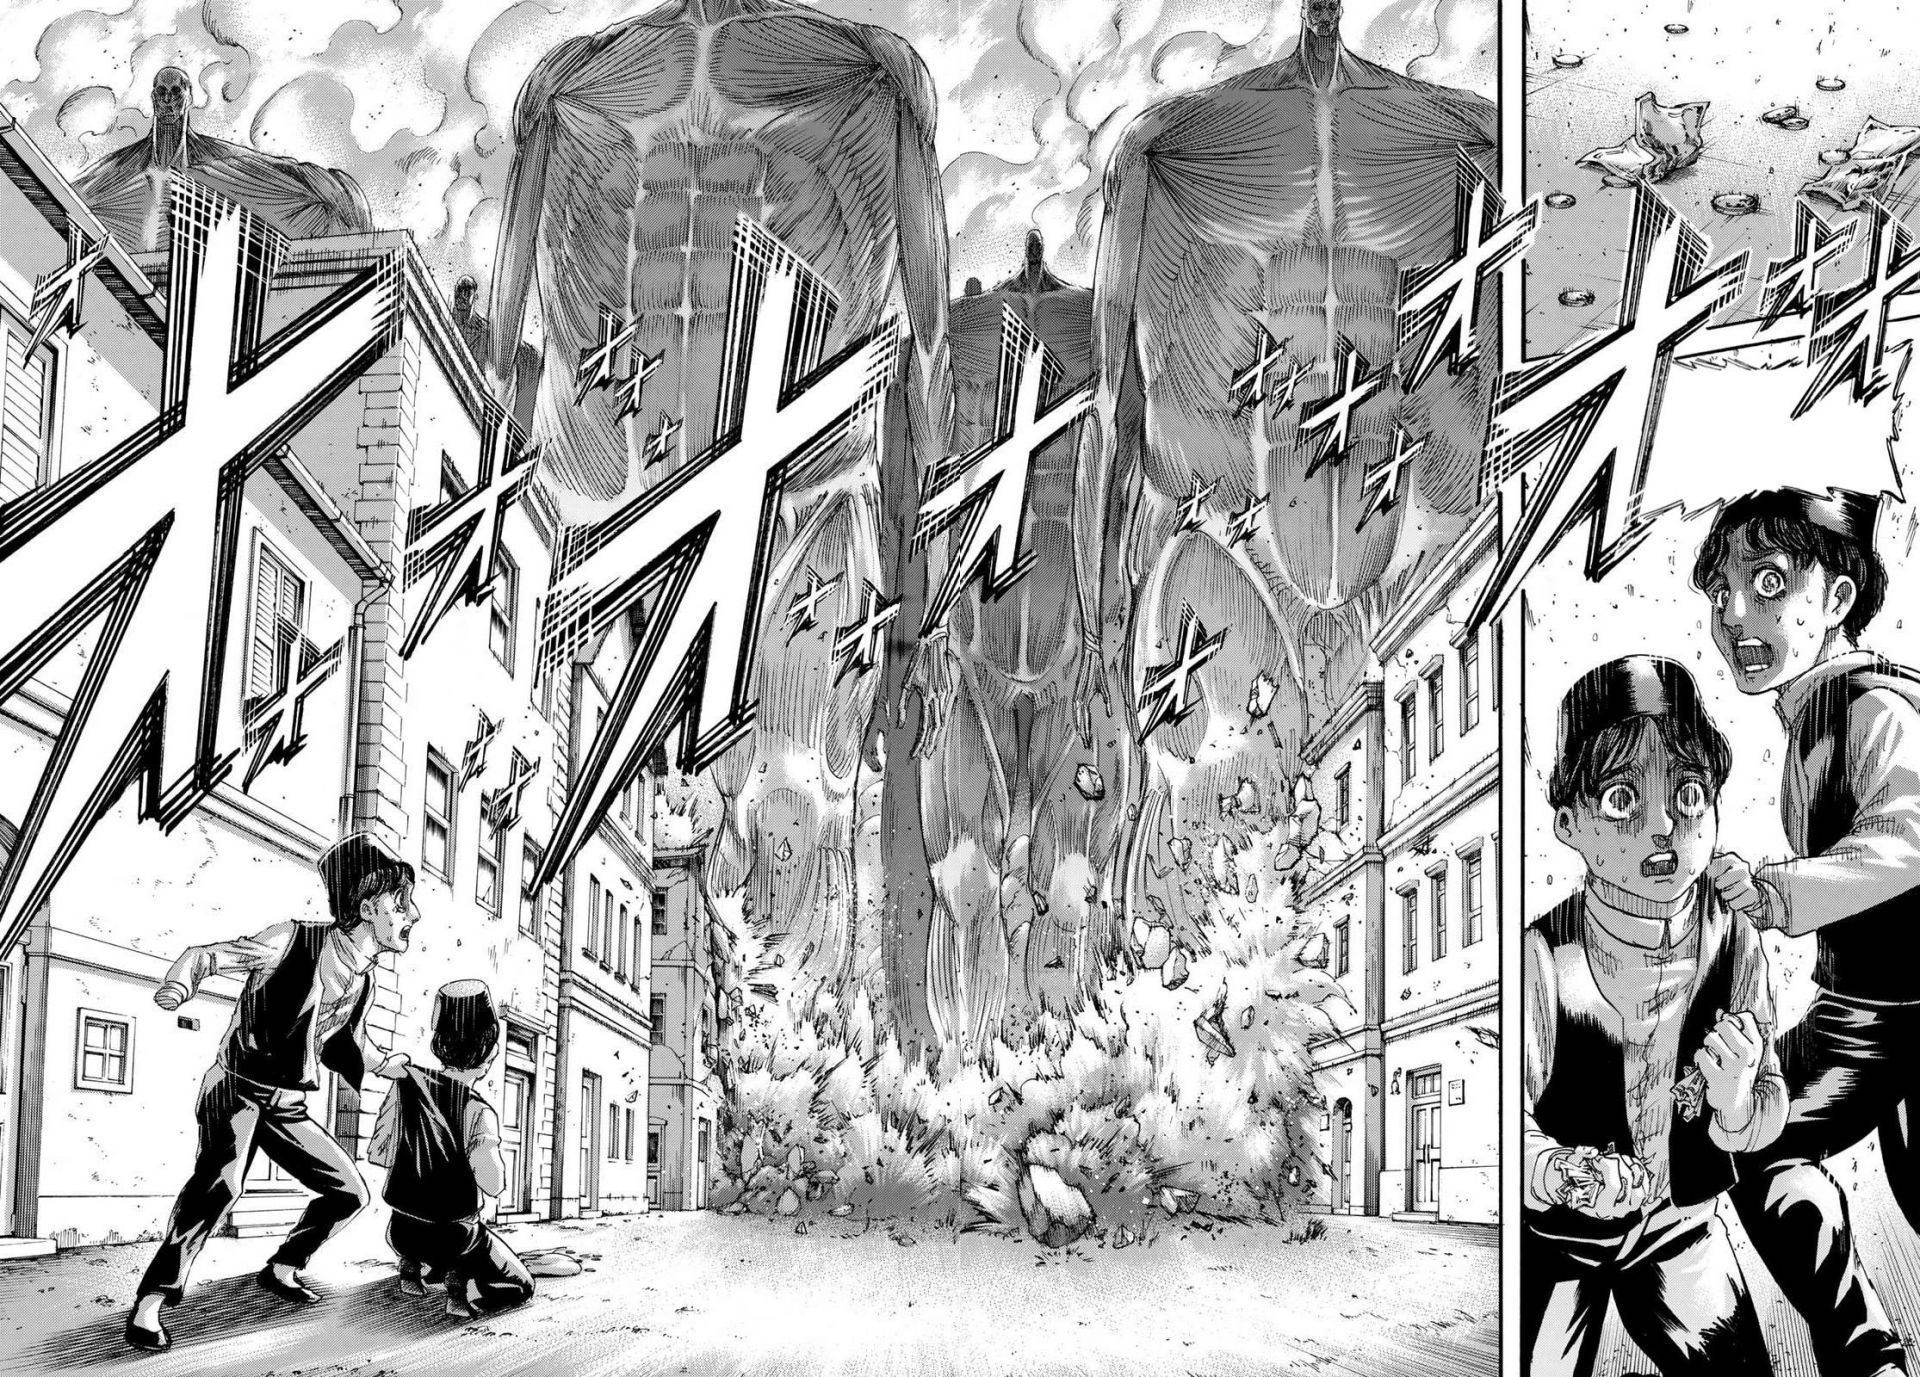 The Rumbling in AOT, from the perspective of refugees. (Image via hajime isayama/Shueisha)